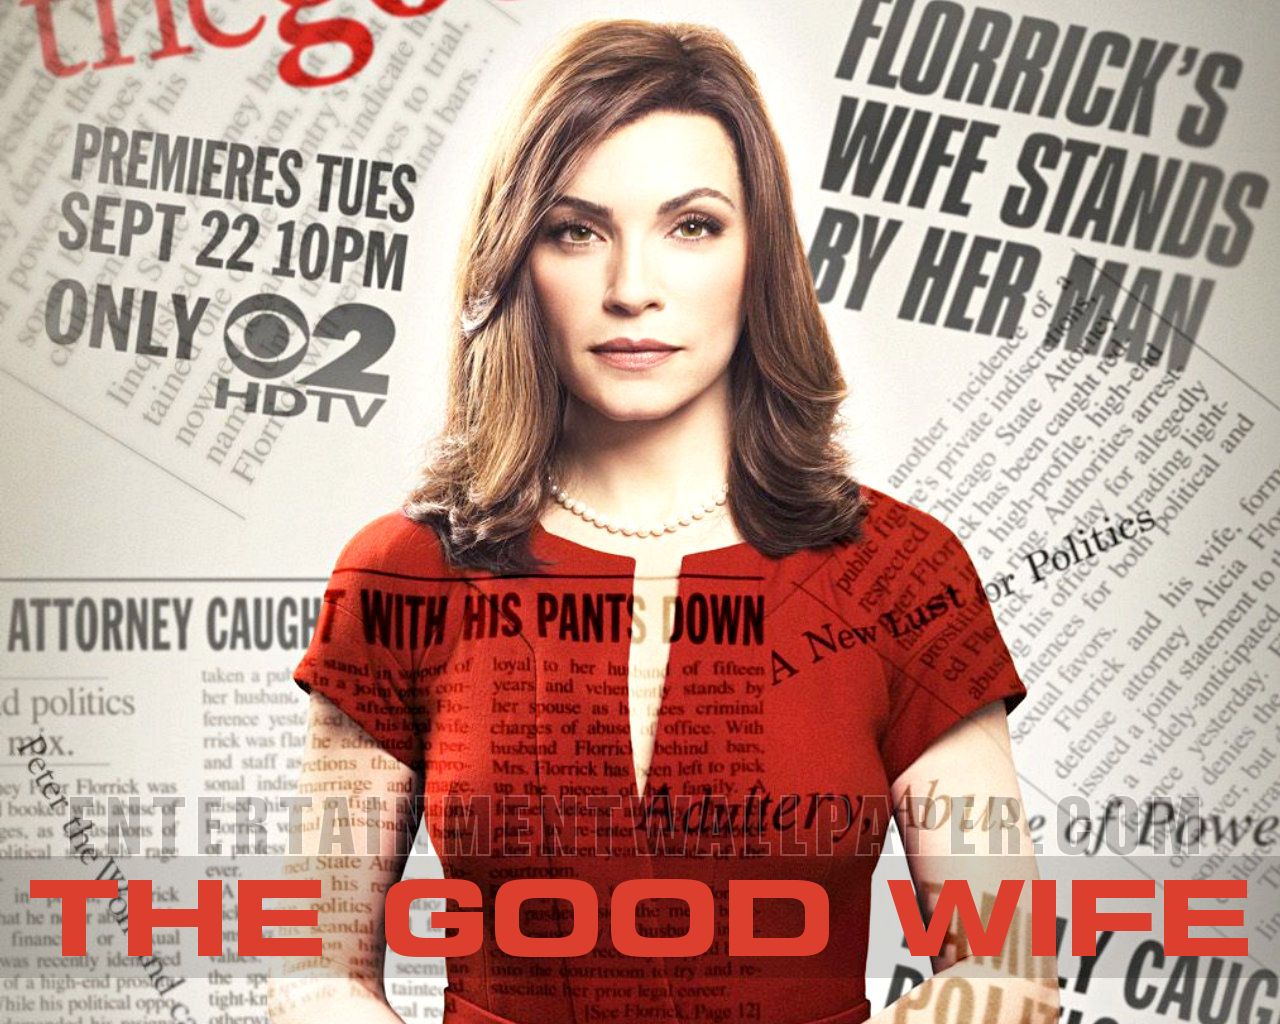 The Good Wife Wallpapers